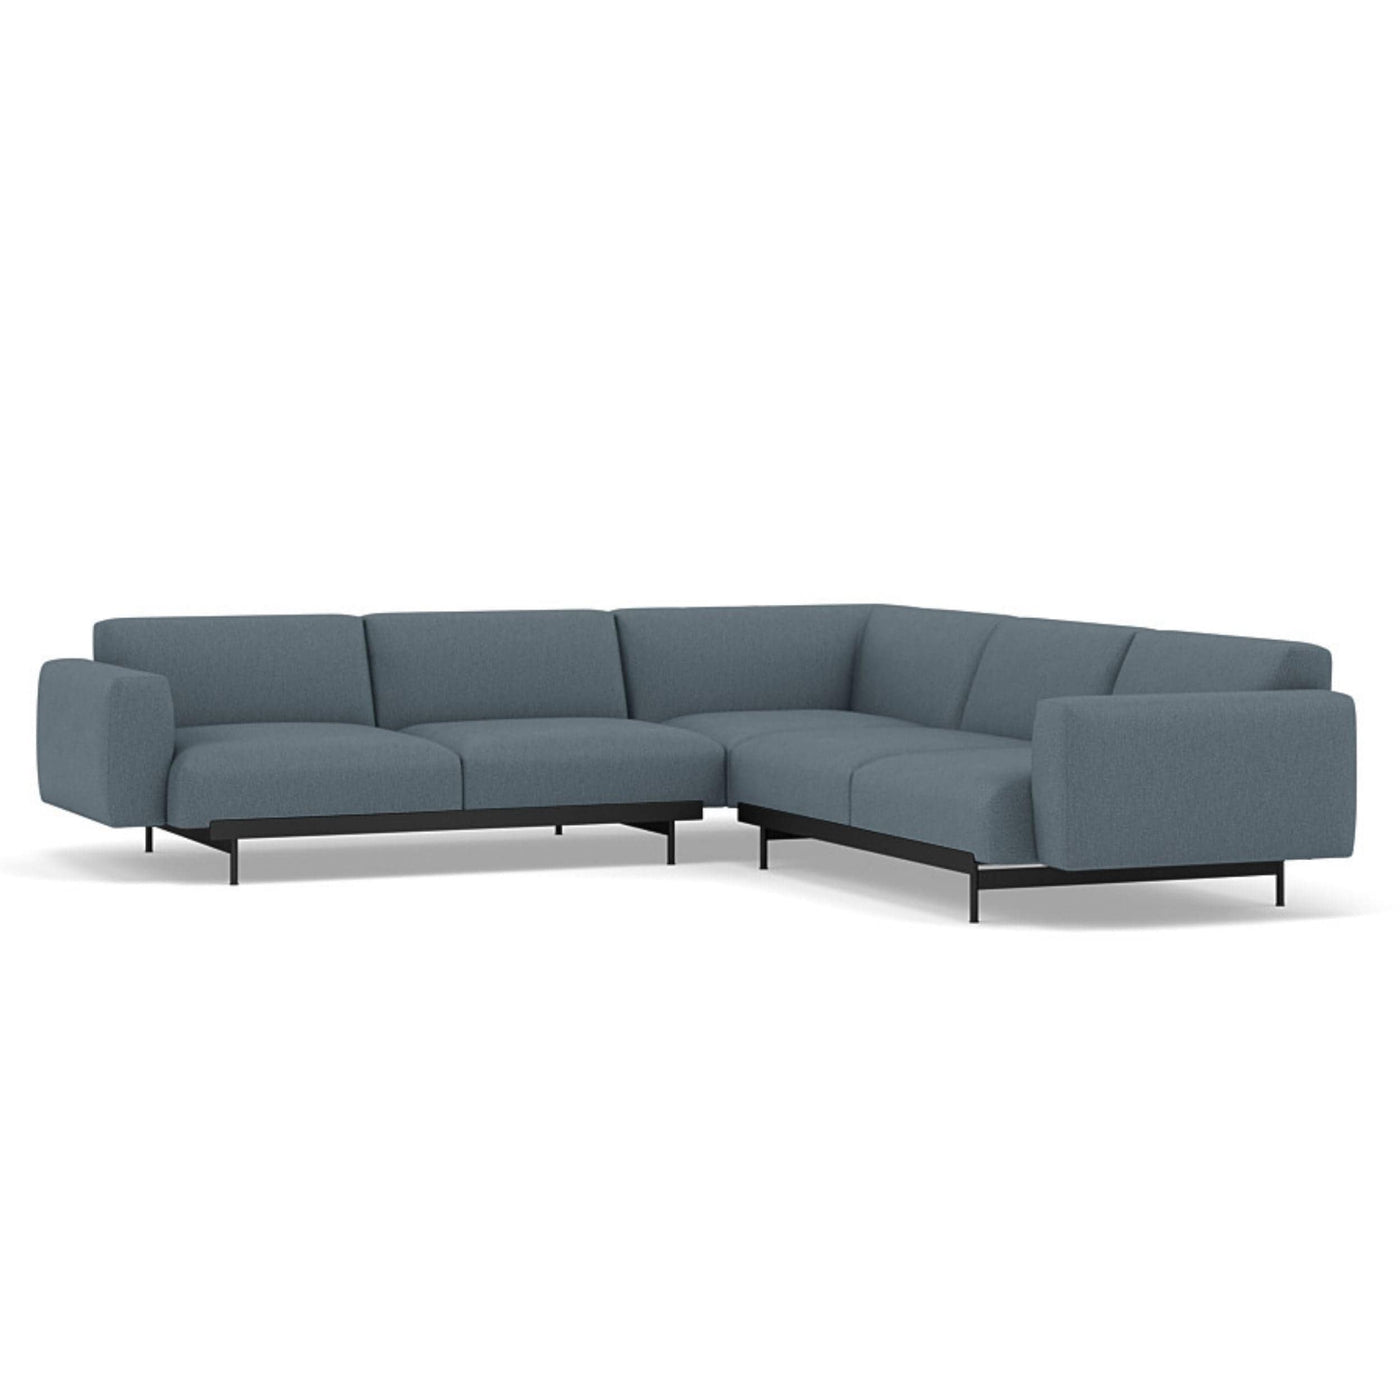 Muuto In Situ corner sofa, configuration 1 in clay 1 fabric. Made to order from someday designs. #colour_clay-1-blue